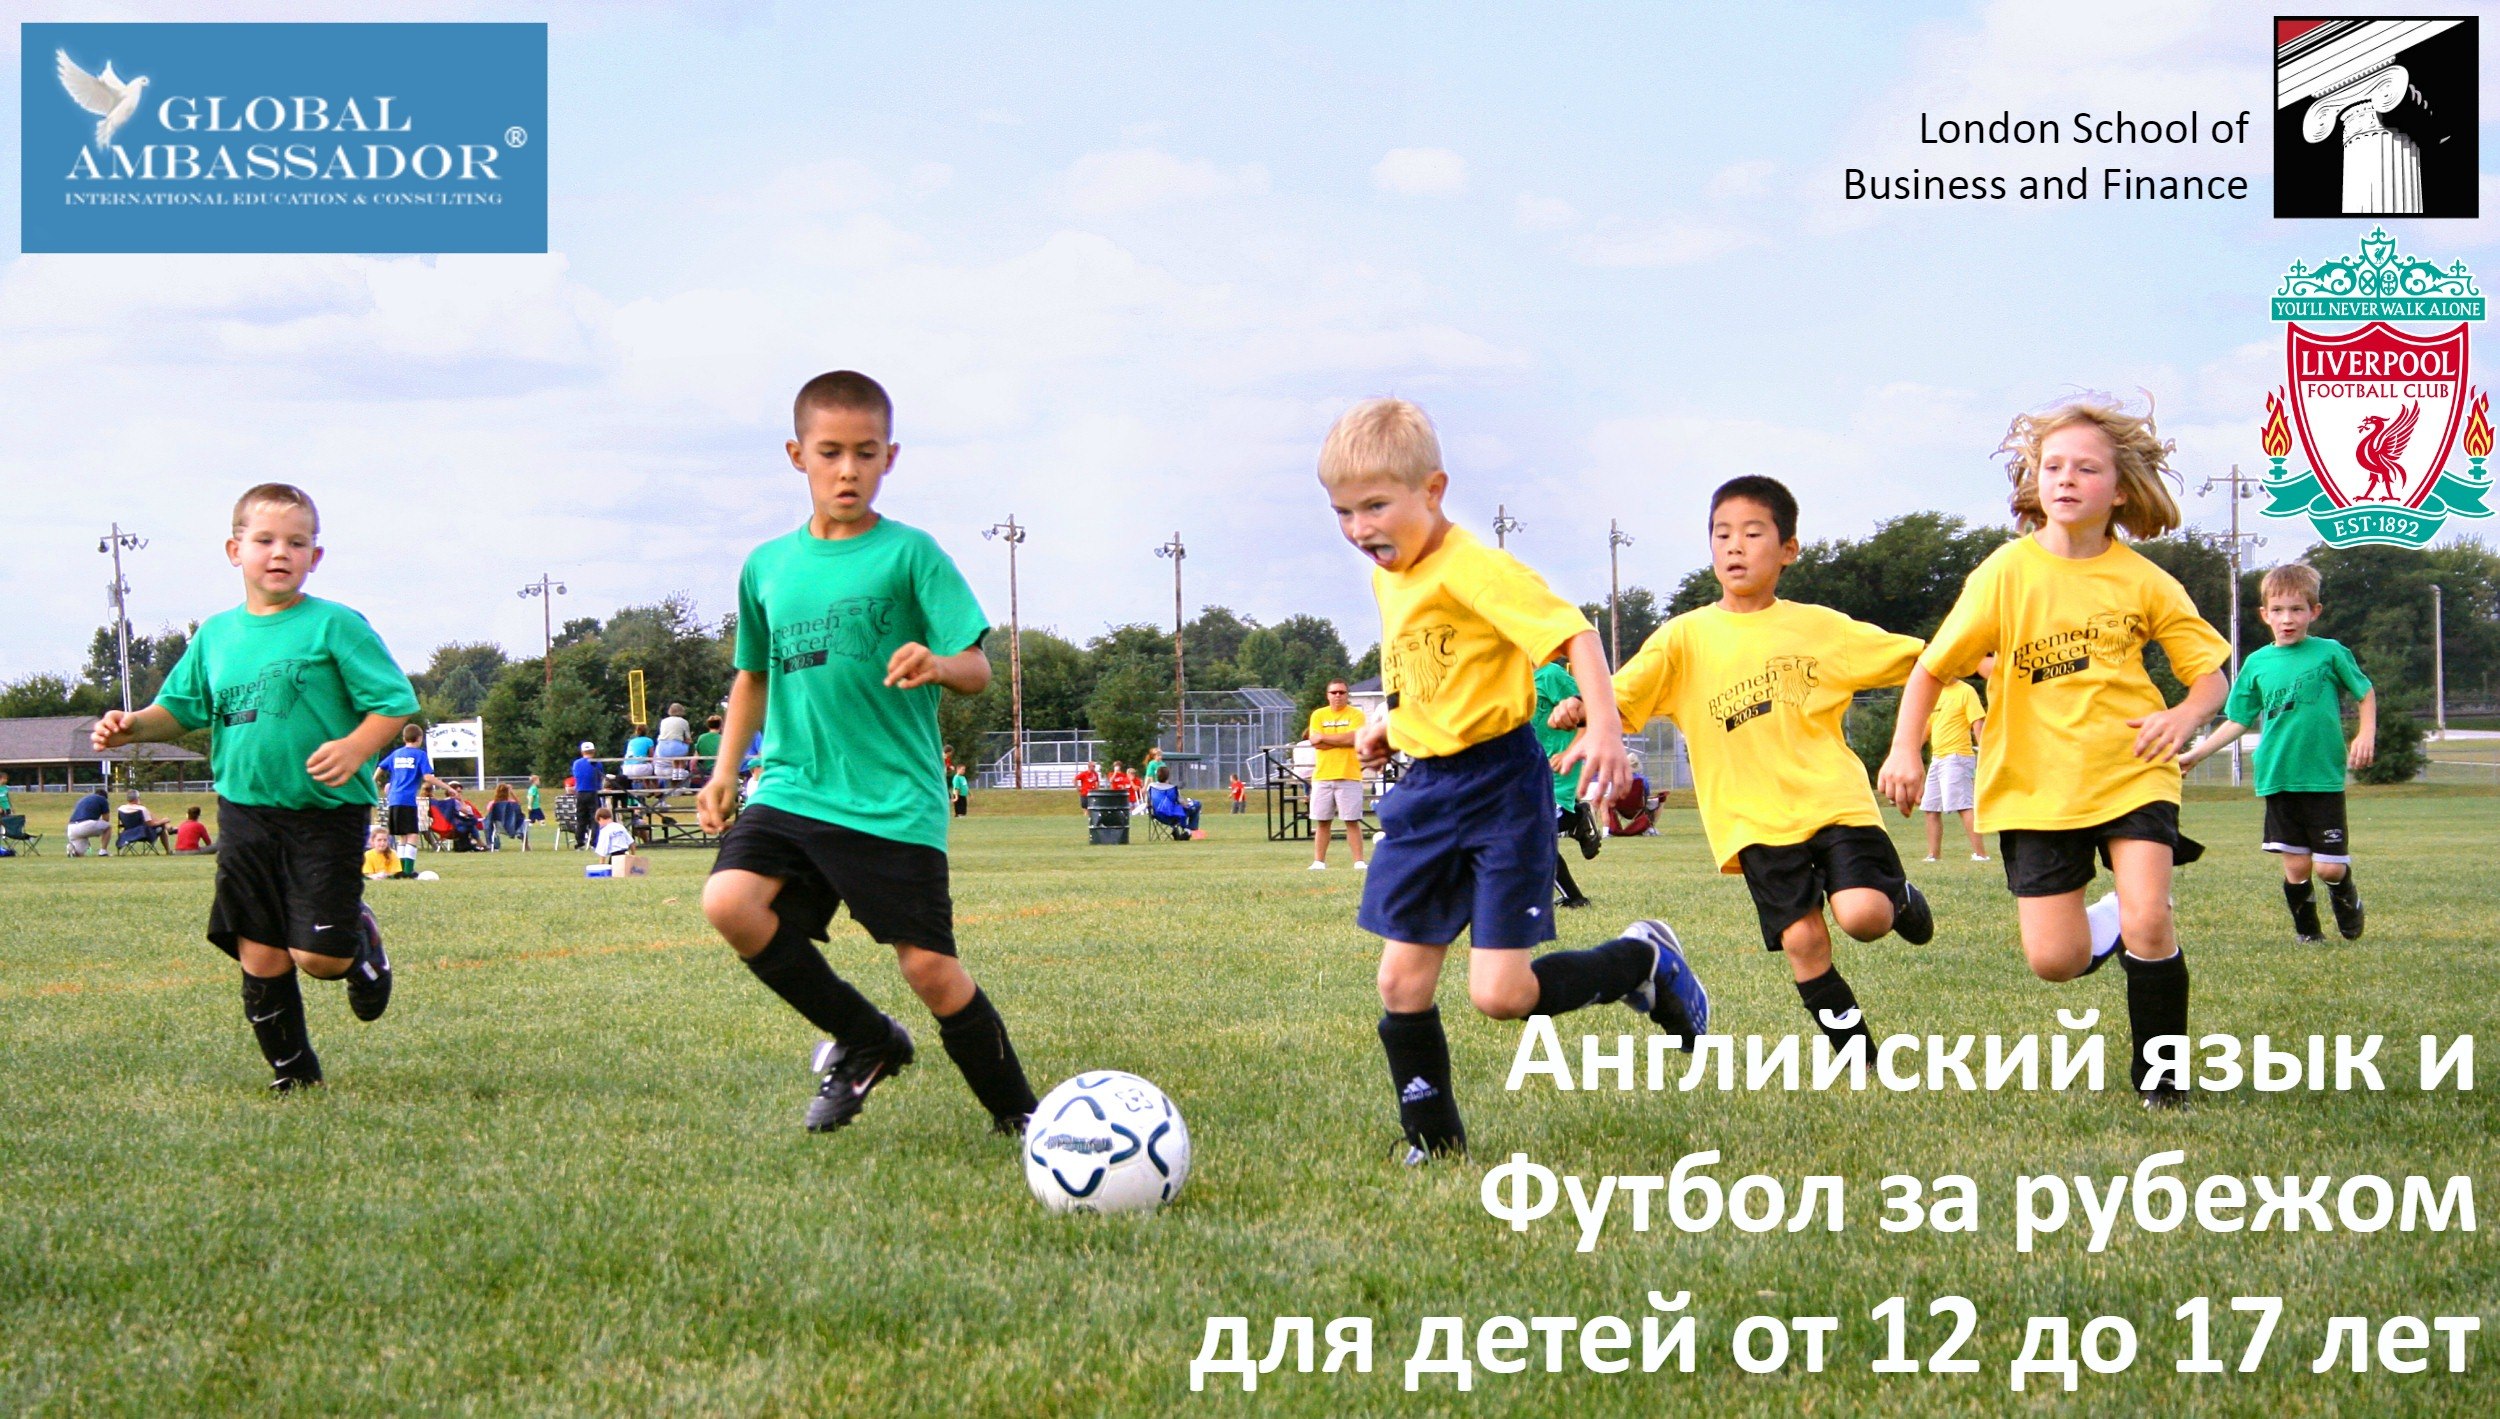 Young-Persons-Football-Match-Background2